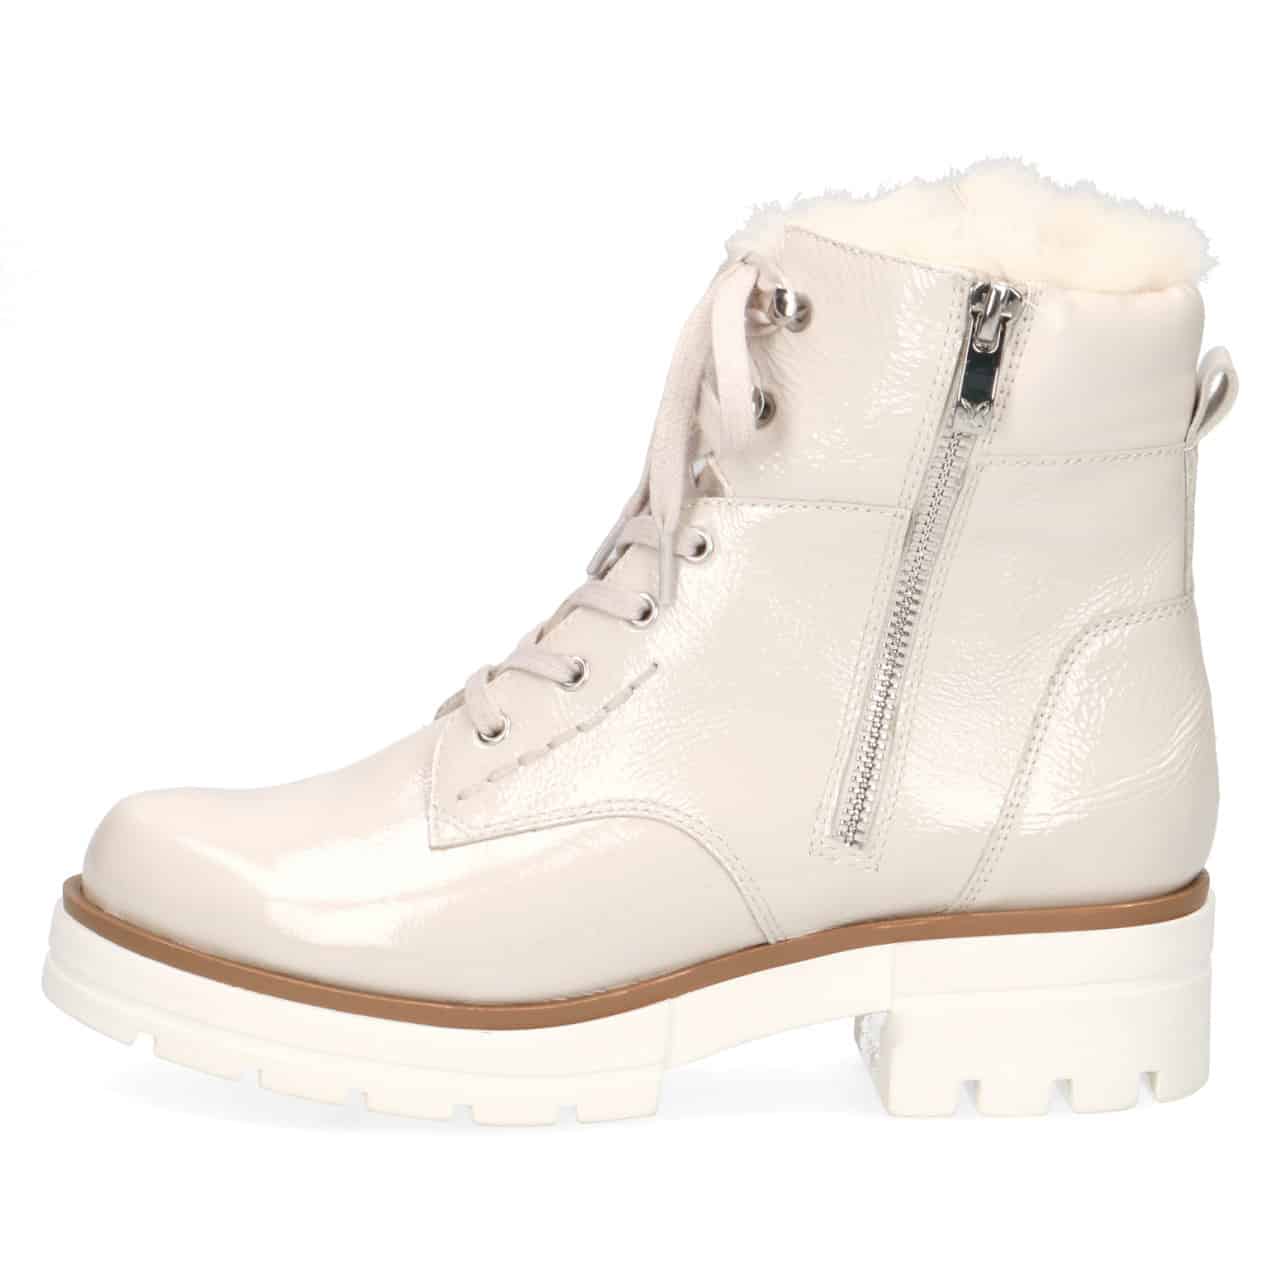 Caprice Snow patent lace front boot with side zip. Only size 3.5 left